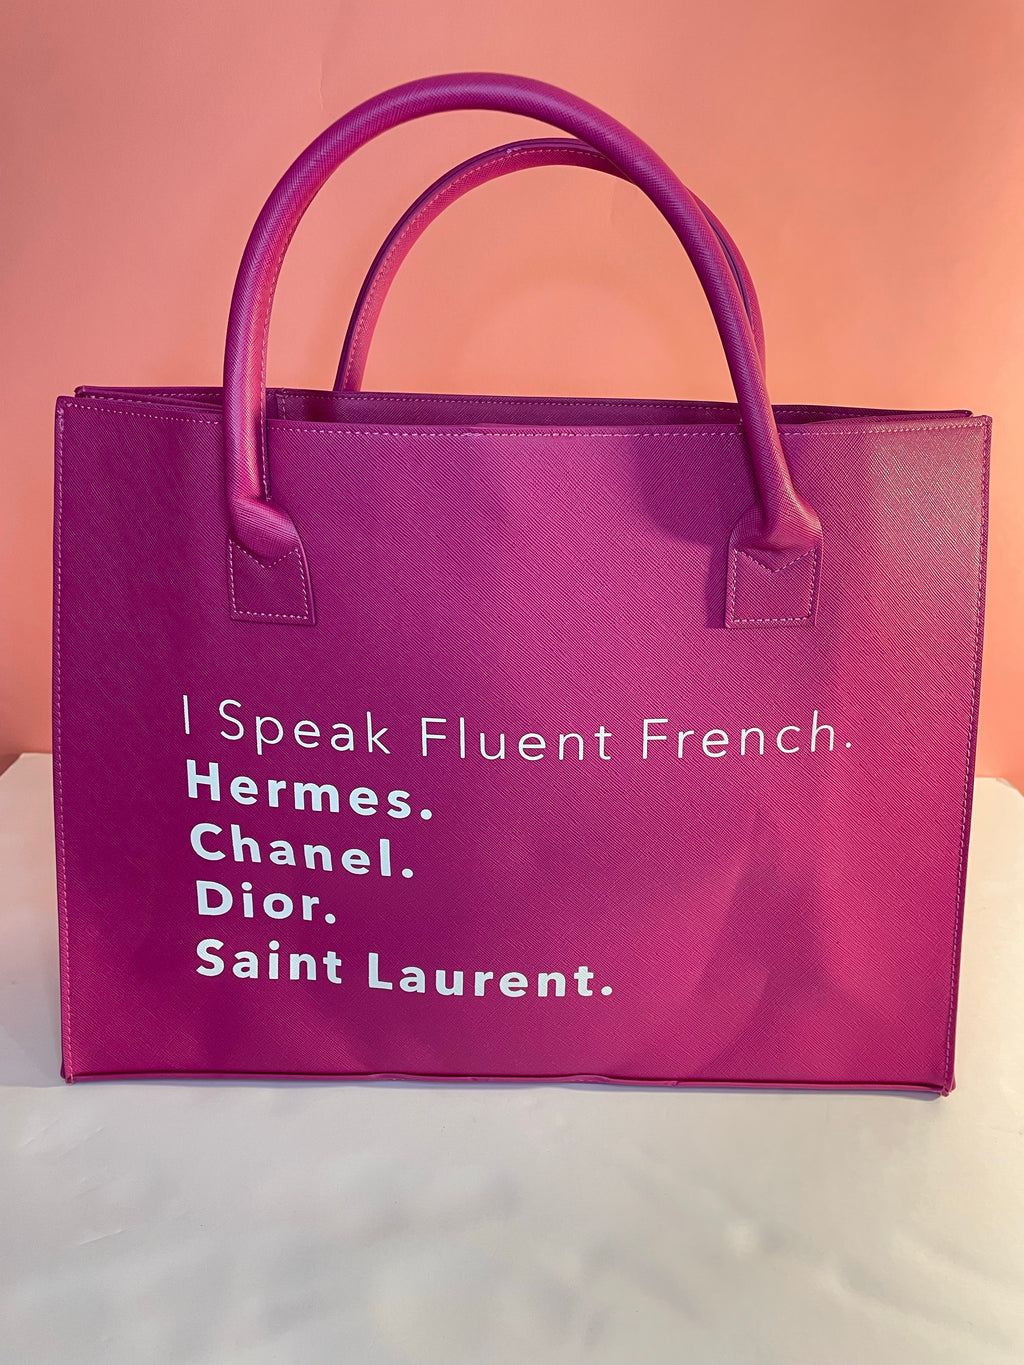 It's BAG season! And we have the must have bags of the season! Shop our 100% vegan leather "I Speak Fluent French Designers" magenta tote! A beautiful timeless piece to add to your wardrobe collection! This Luxurious vegan leather Black tote is the must have handbag of the season. Very spacious.